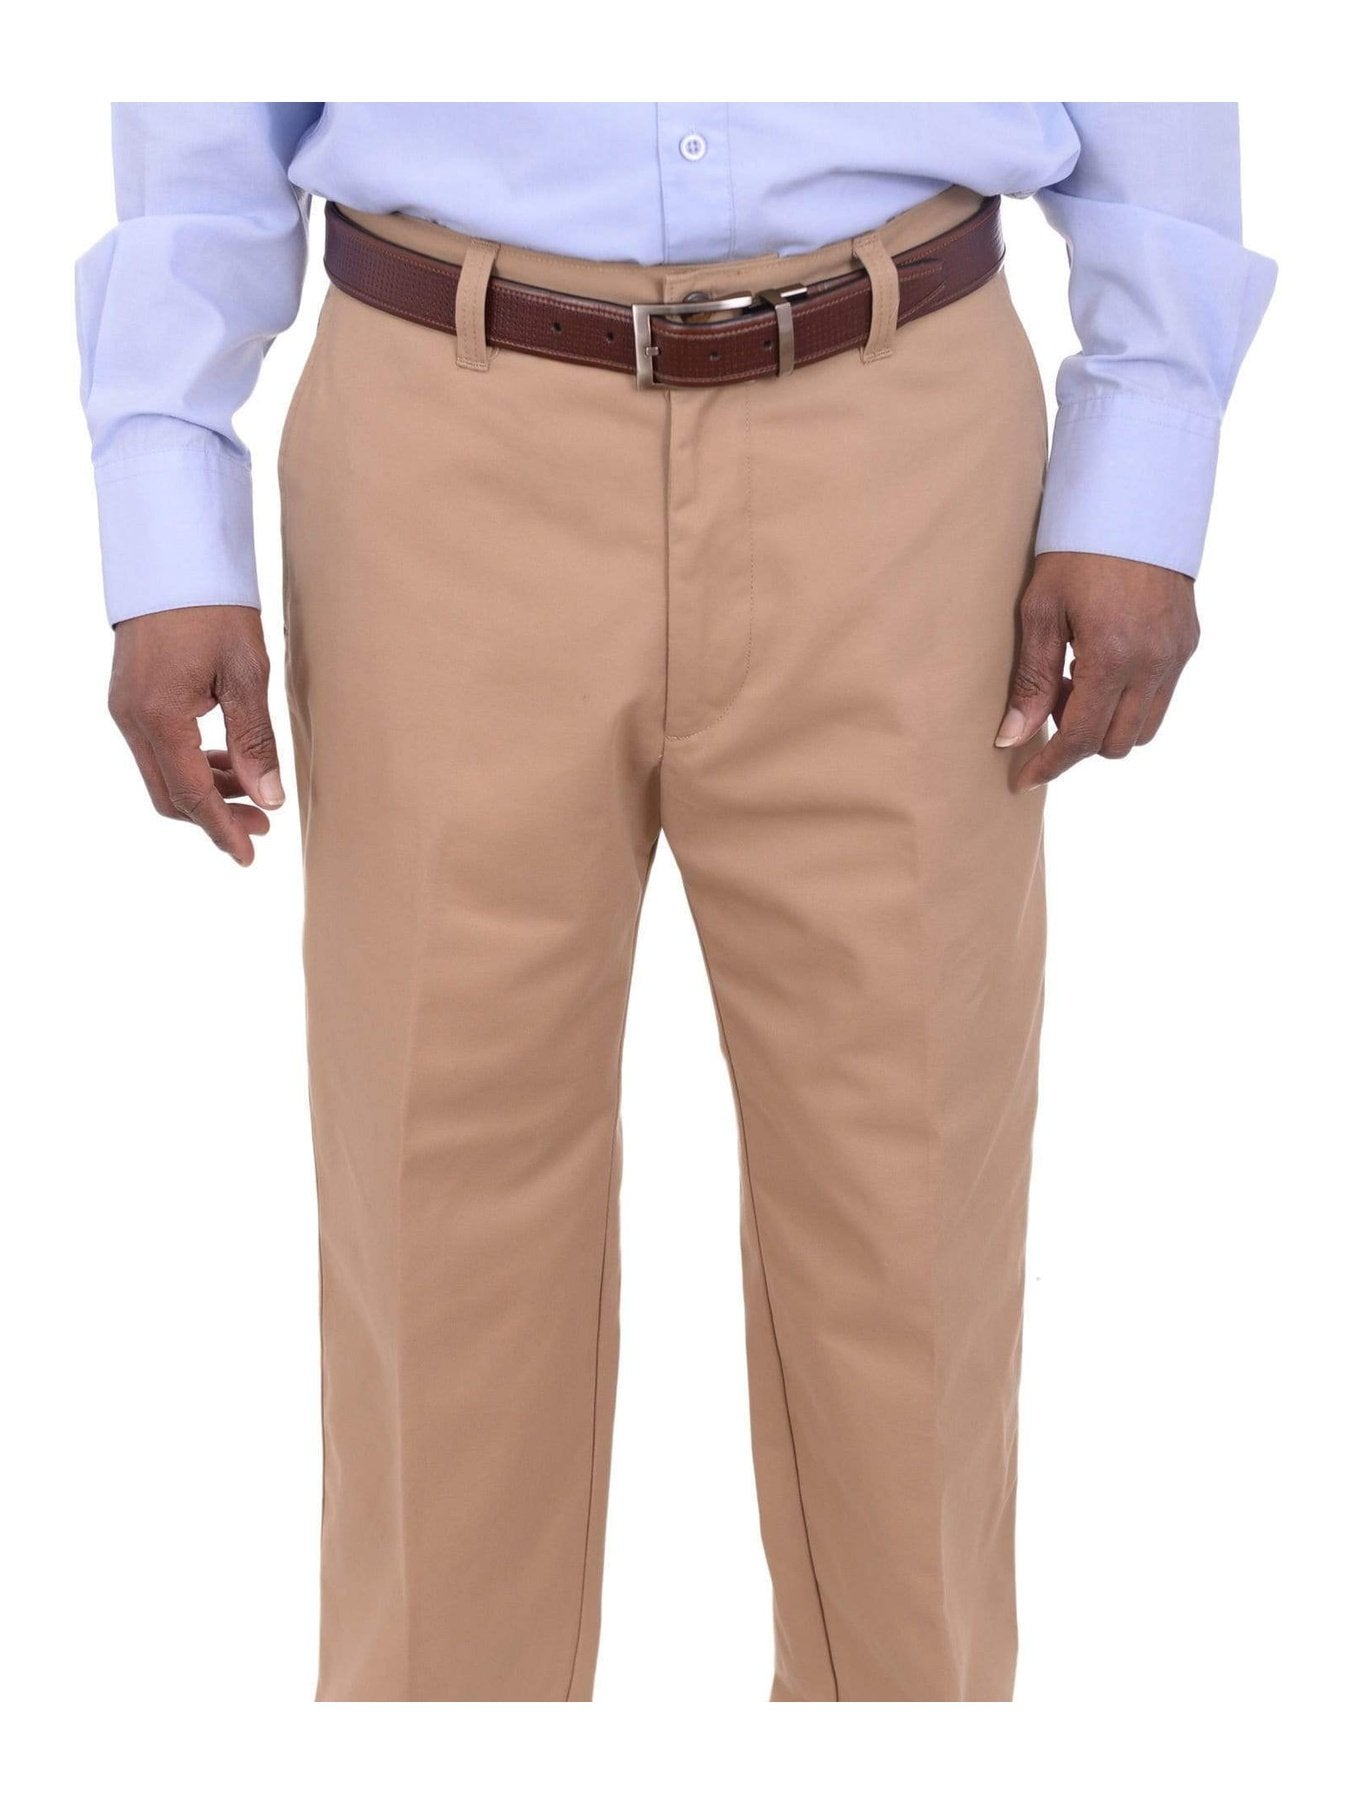 Haggar Regular Fit Solid Beige Khaki Chinos Flat Front Washable Cotton Pants